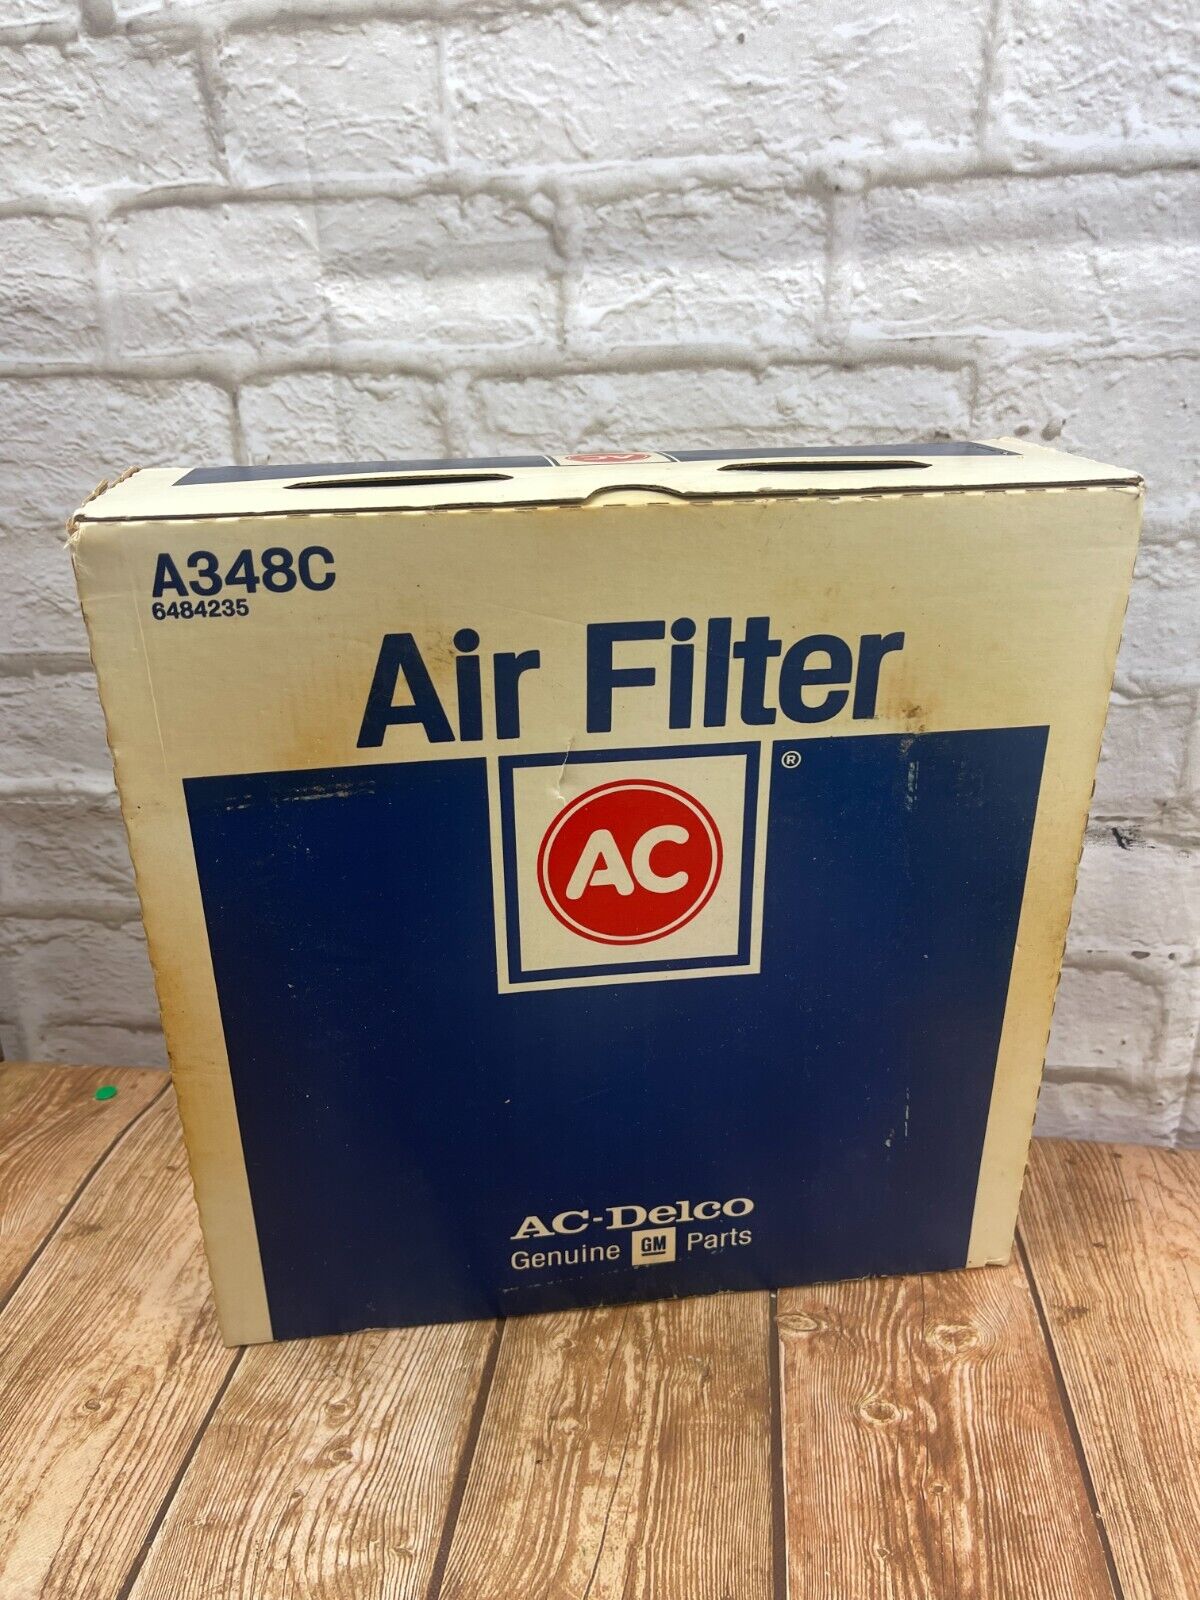 New in Box - AC-Delco Air Filter A348C